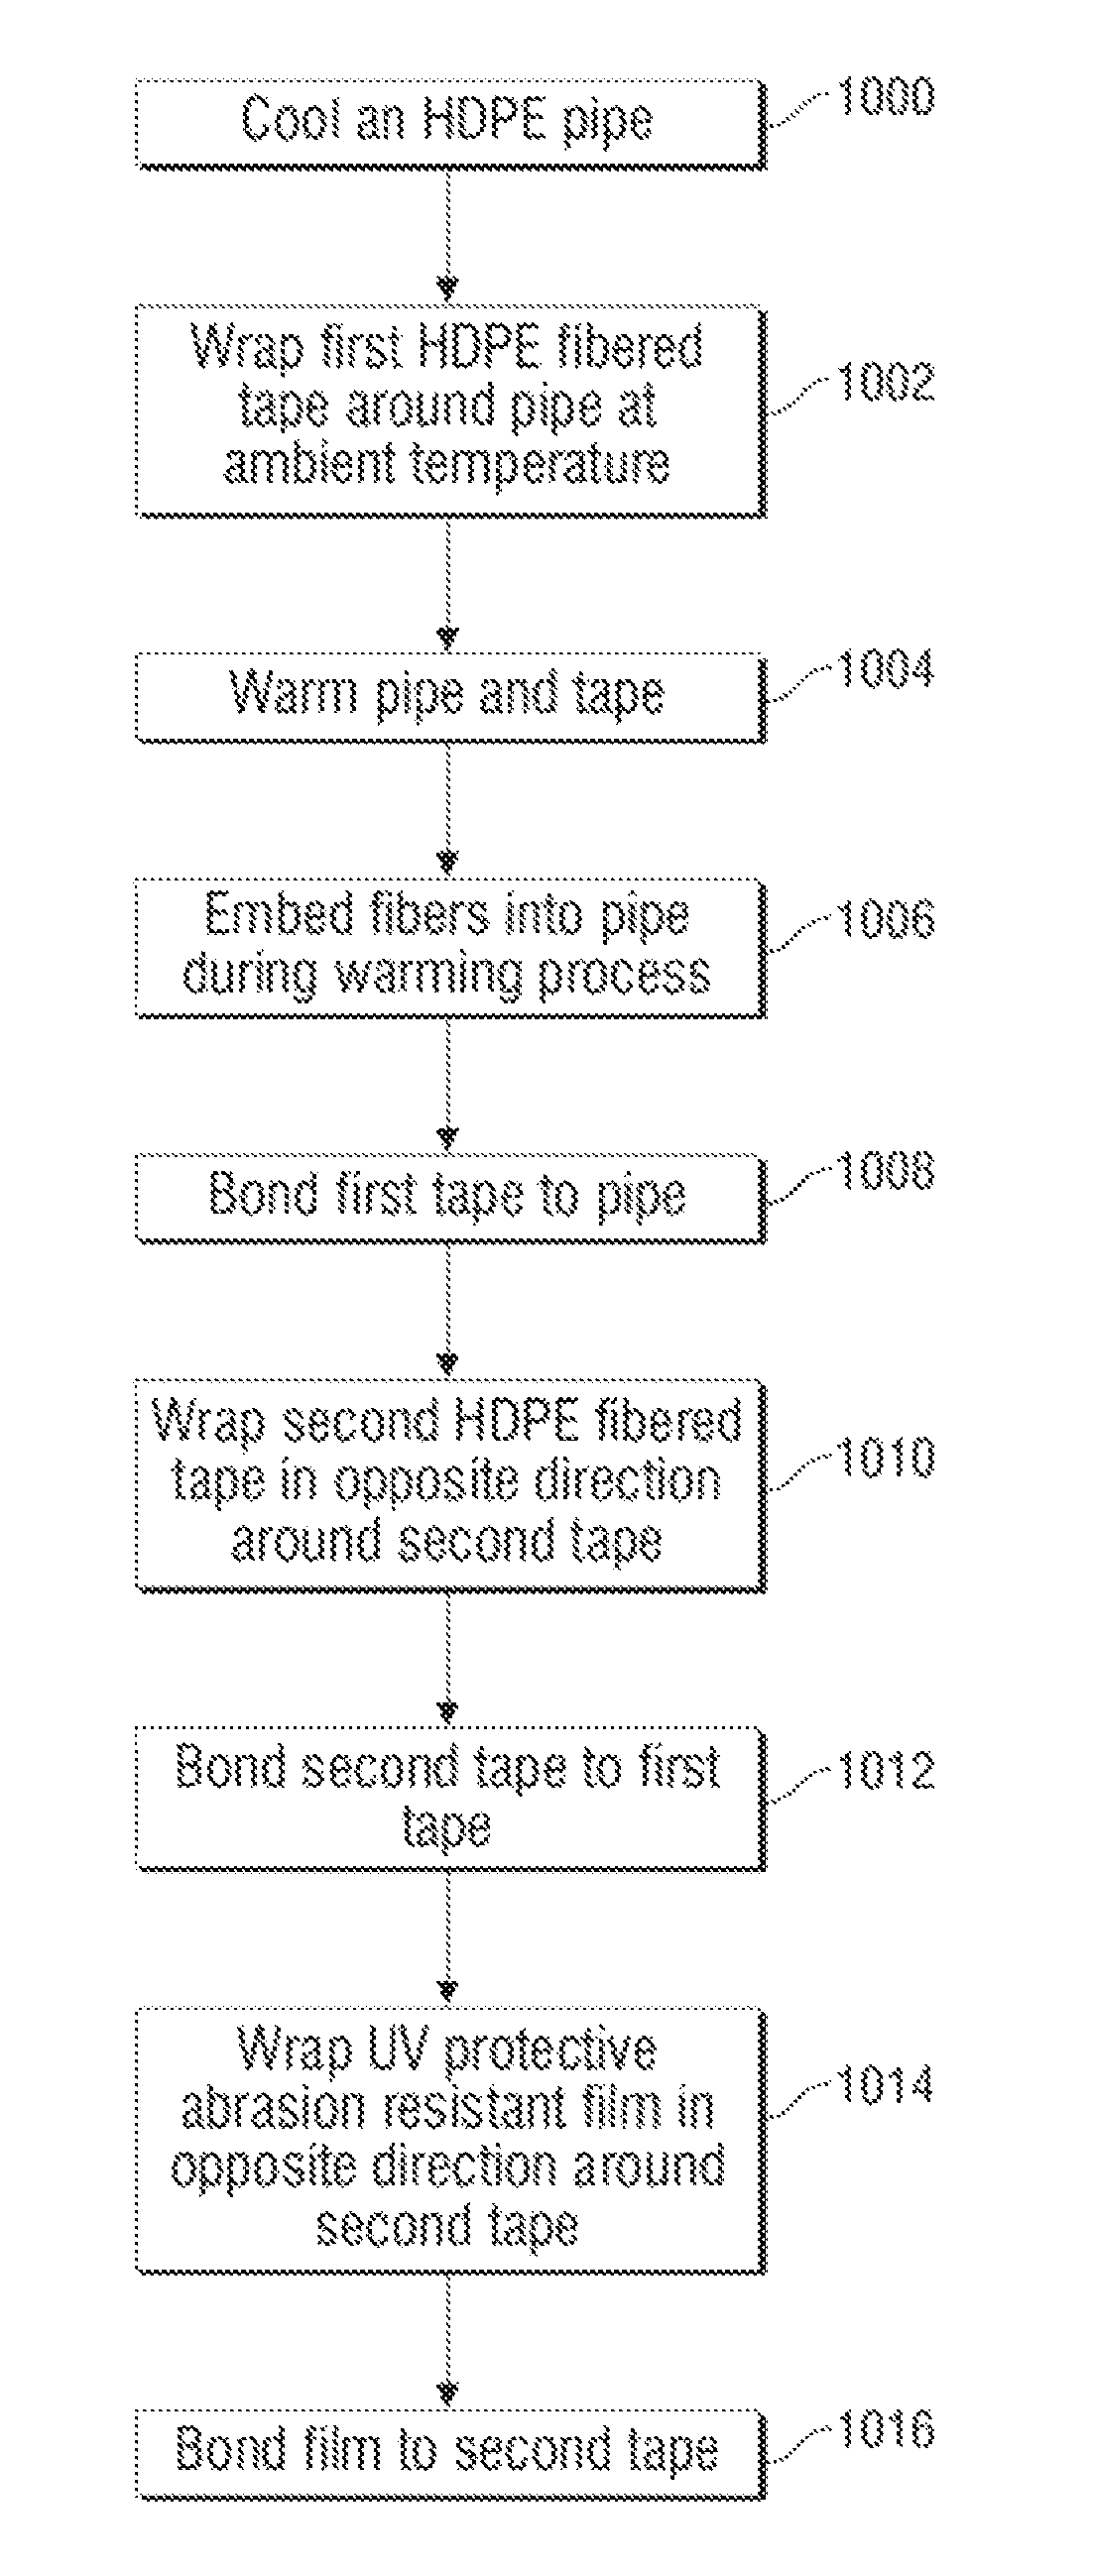 Method for manufacturing a reinforced composite pipe